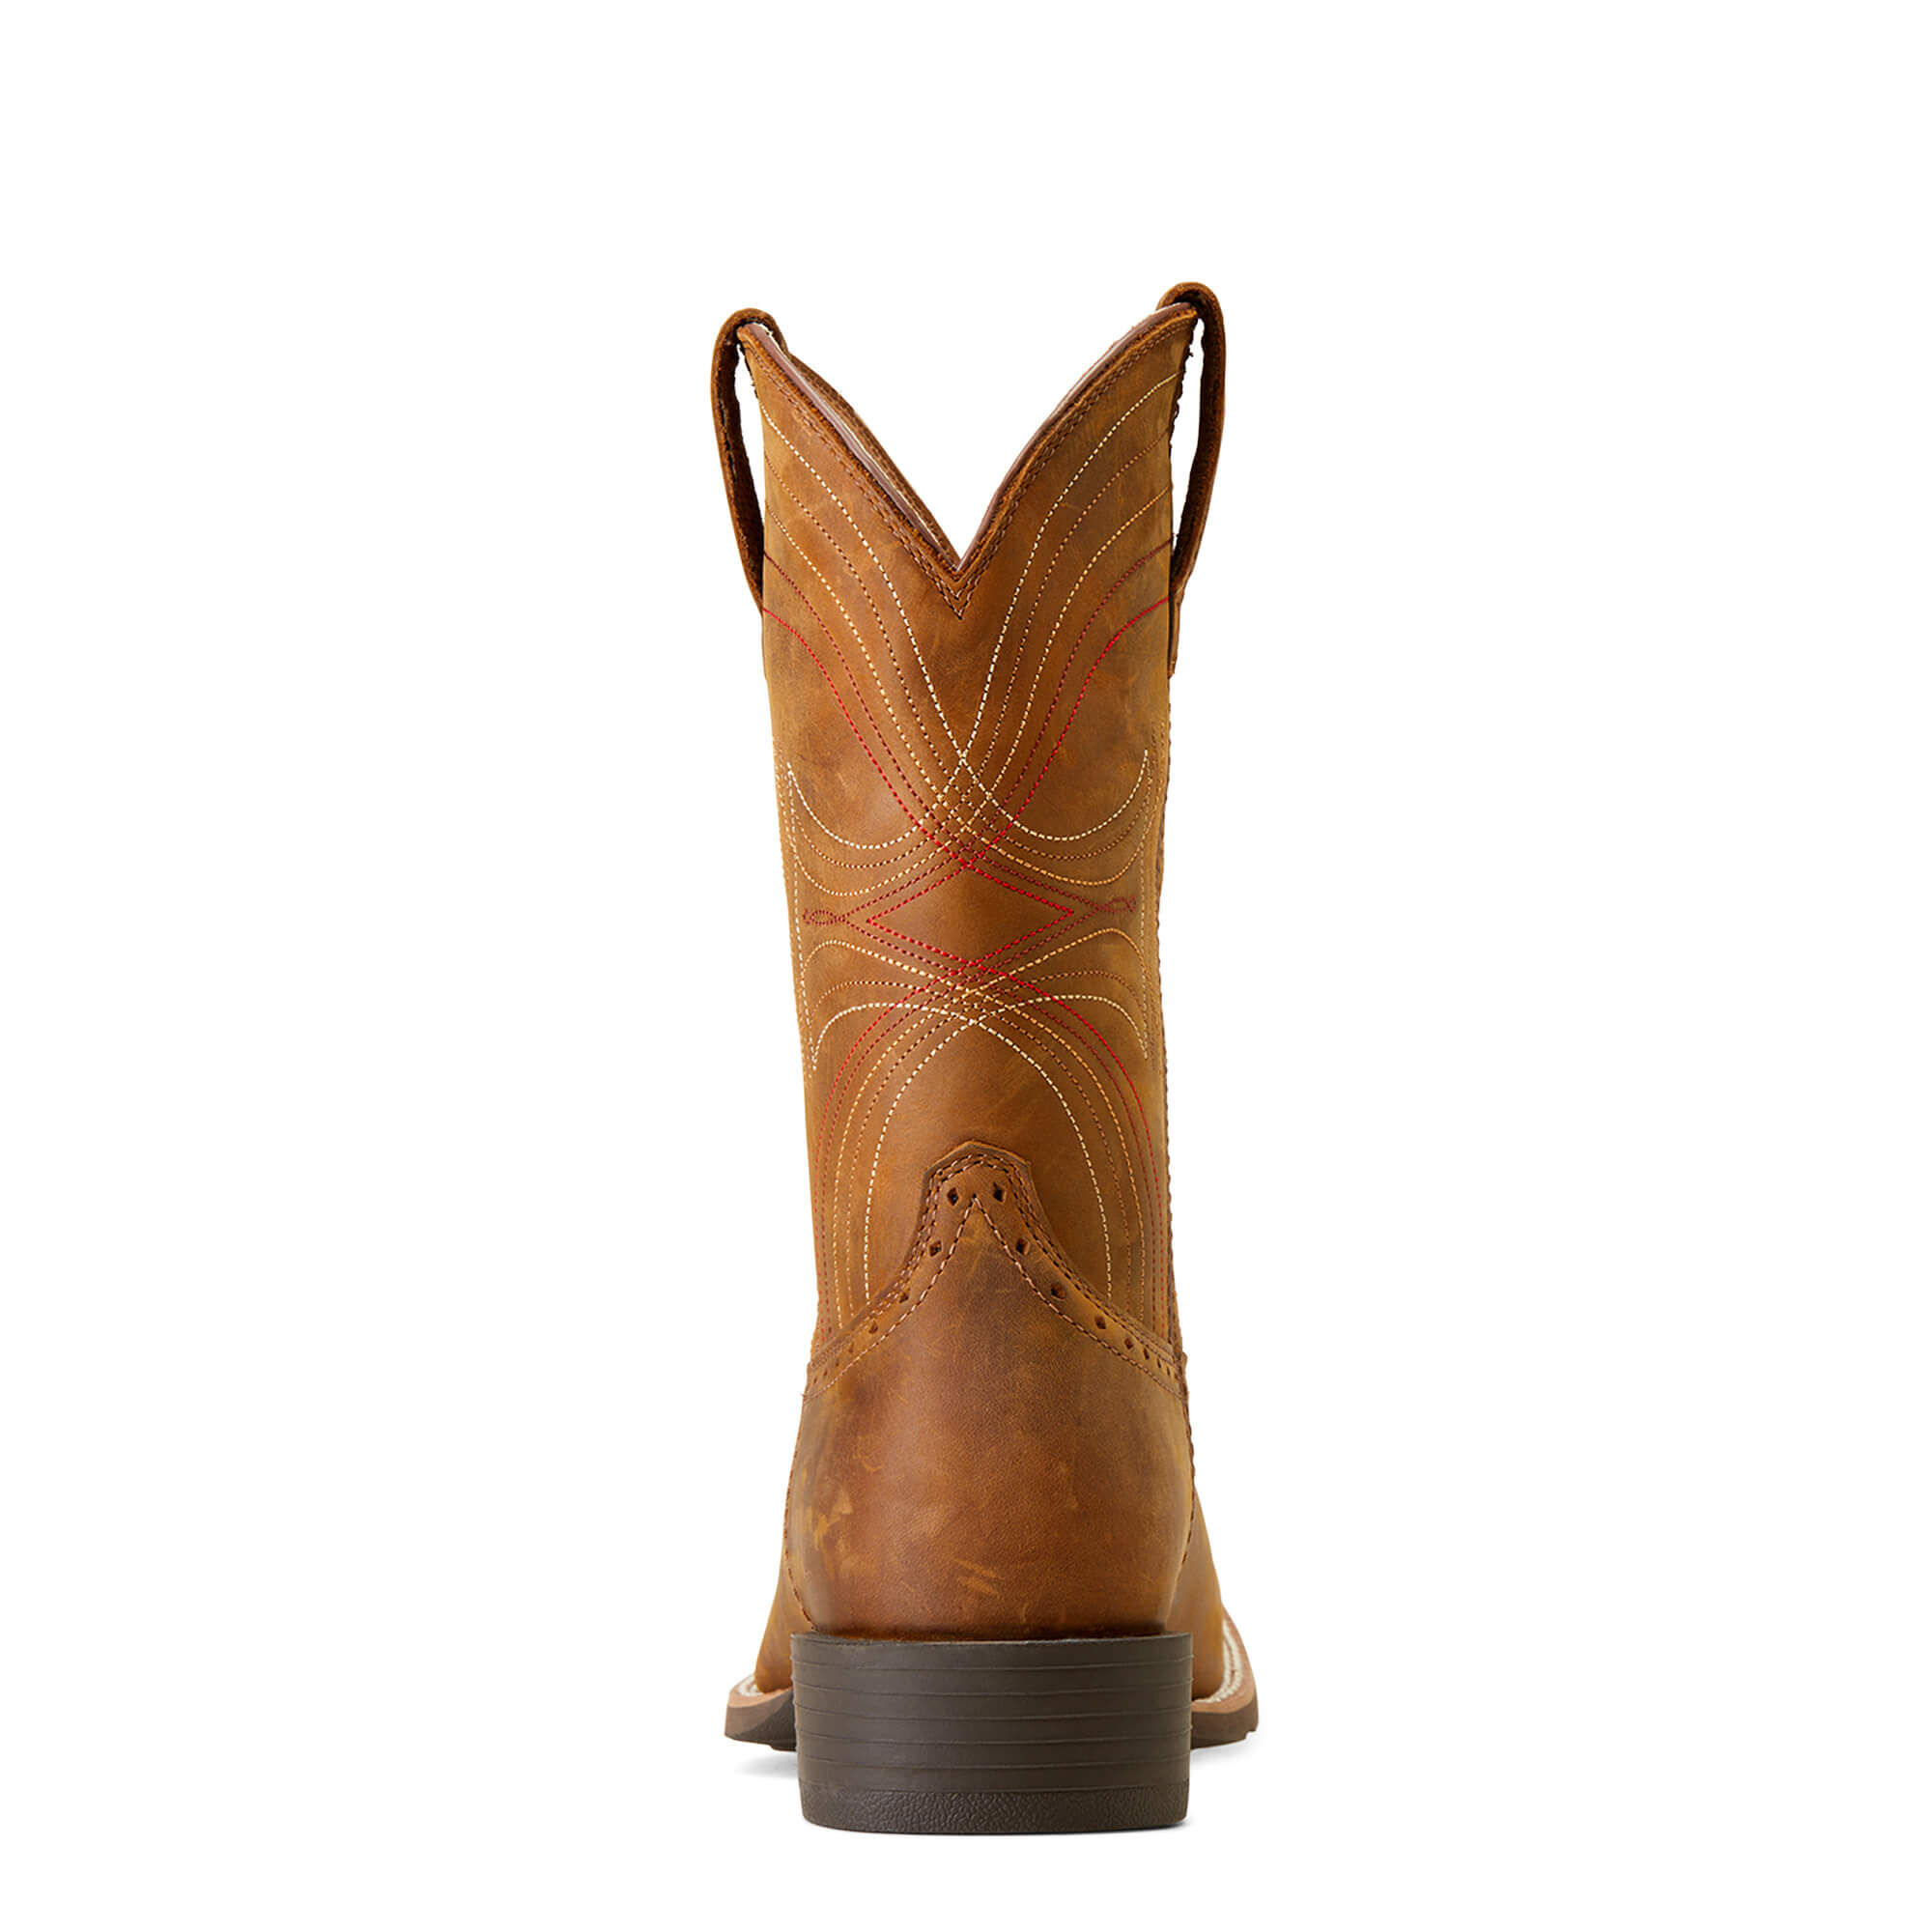 square toe cowgirl boots